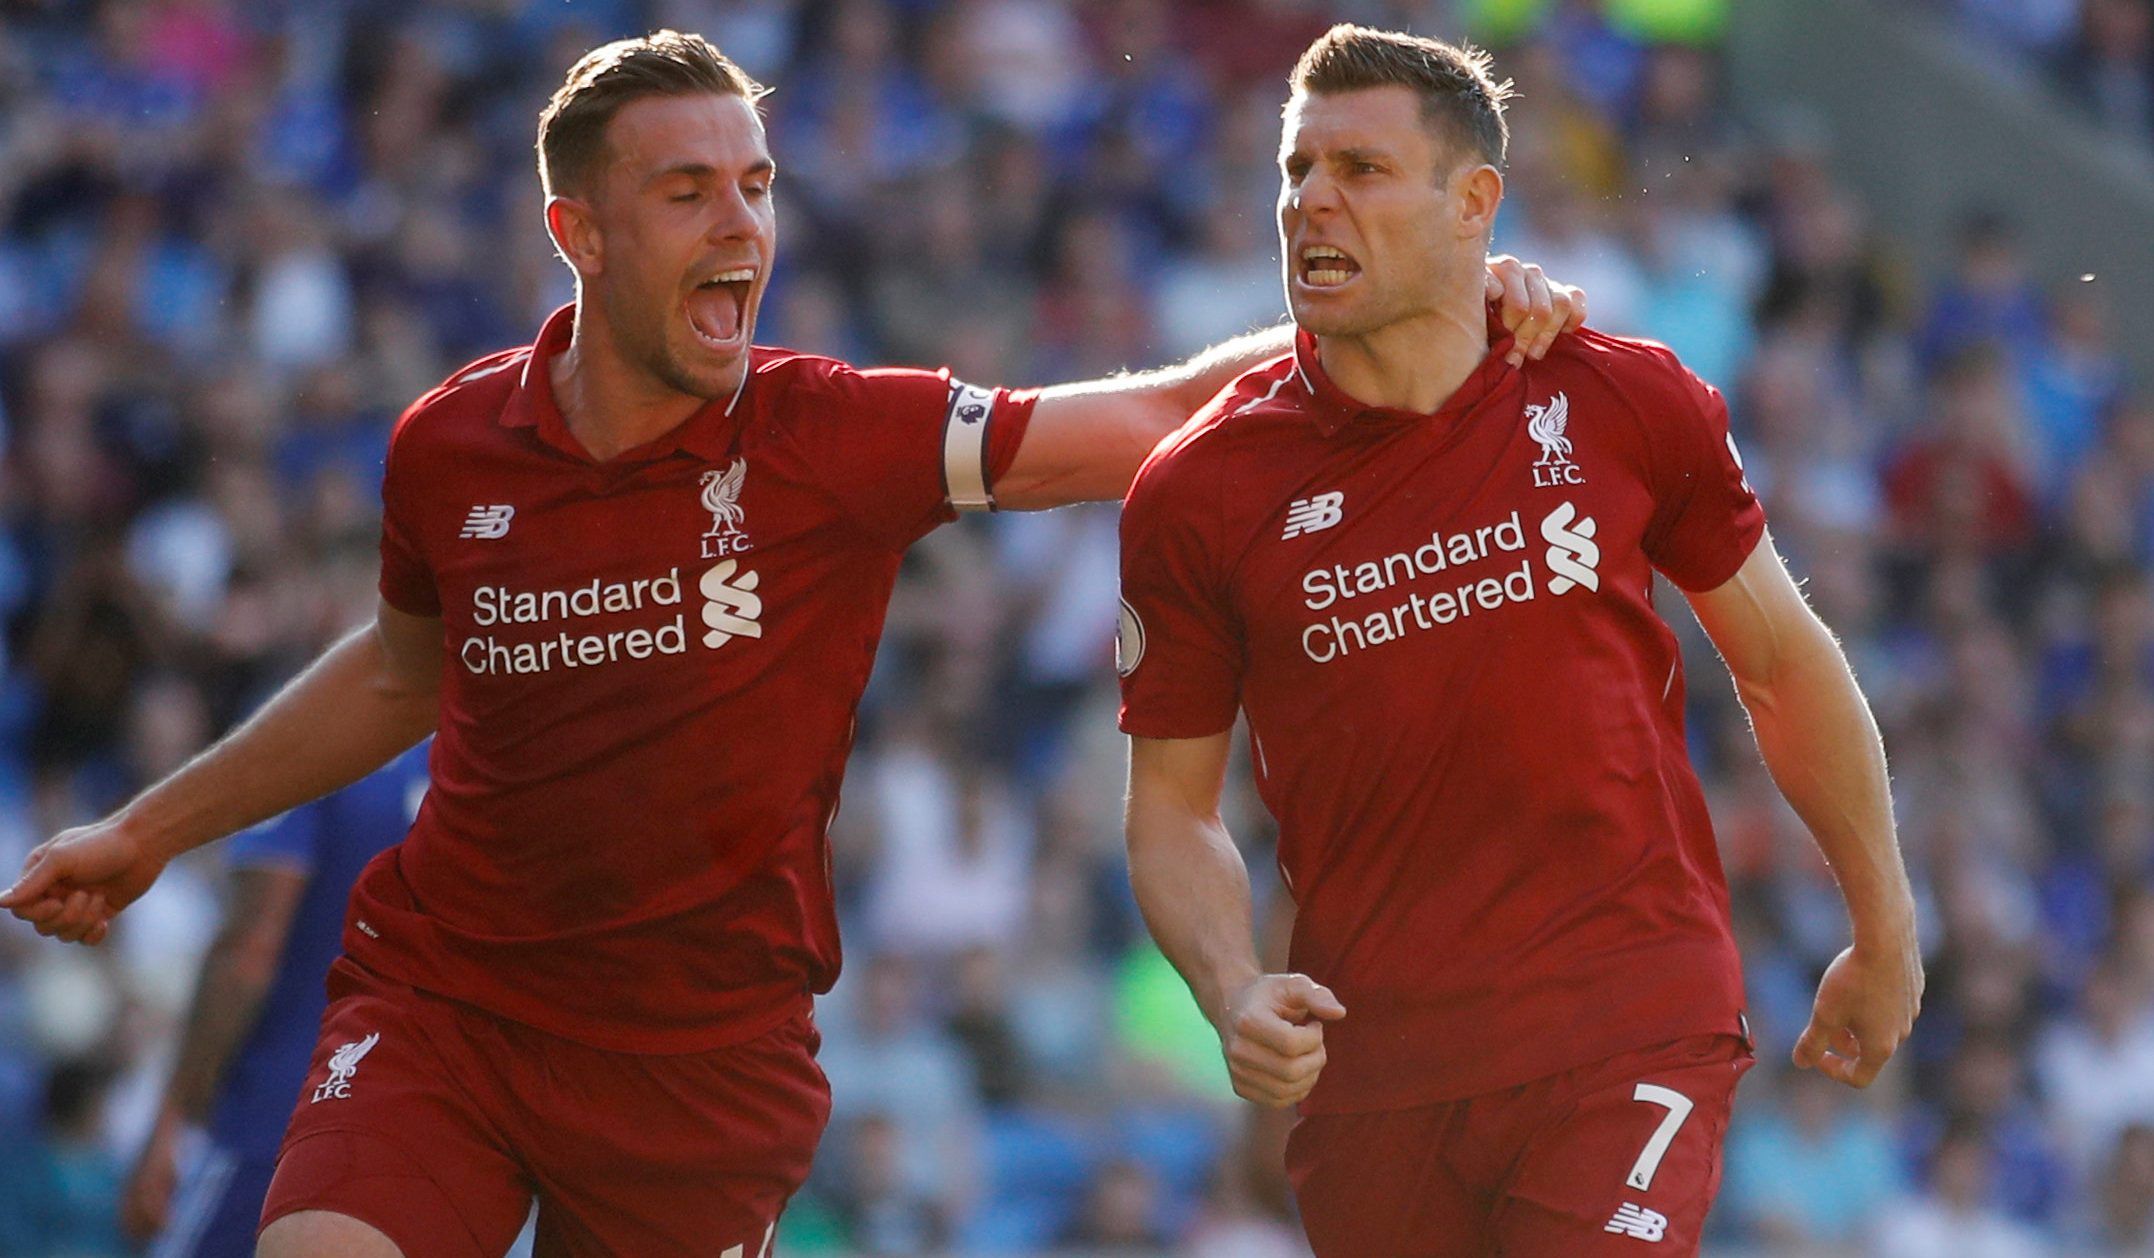 Soccer Football - Premier League - Cardiff City v Liverpool - Cardiff City Stadium, Cardiff, Britain - April 21, 2019   Liverpool's James Milner celebrates scoring their second goal with Jordan Henderson    Action Images via Reuters/Carl Recine    EDITORIAL USE ONLY. No use with unauthorized audio, video, data, fixture lists, club/league logos or 